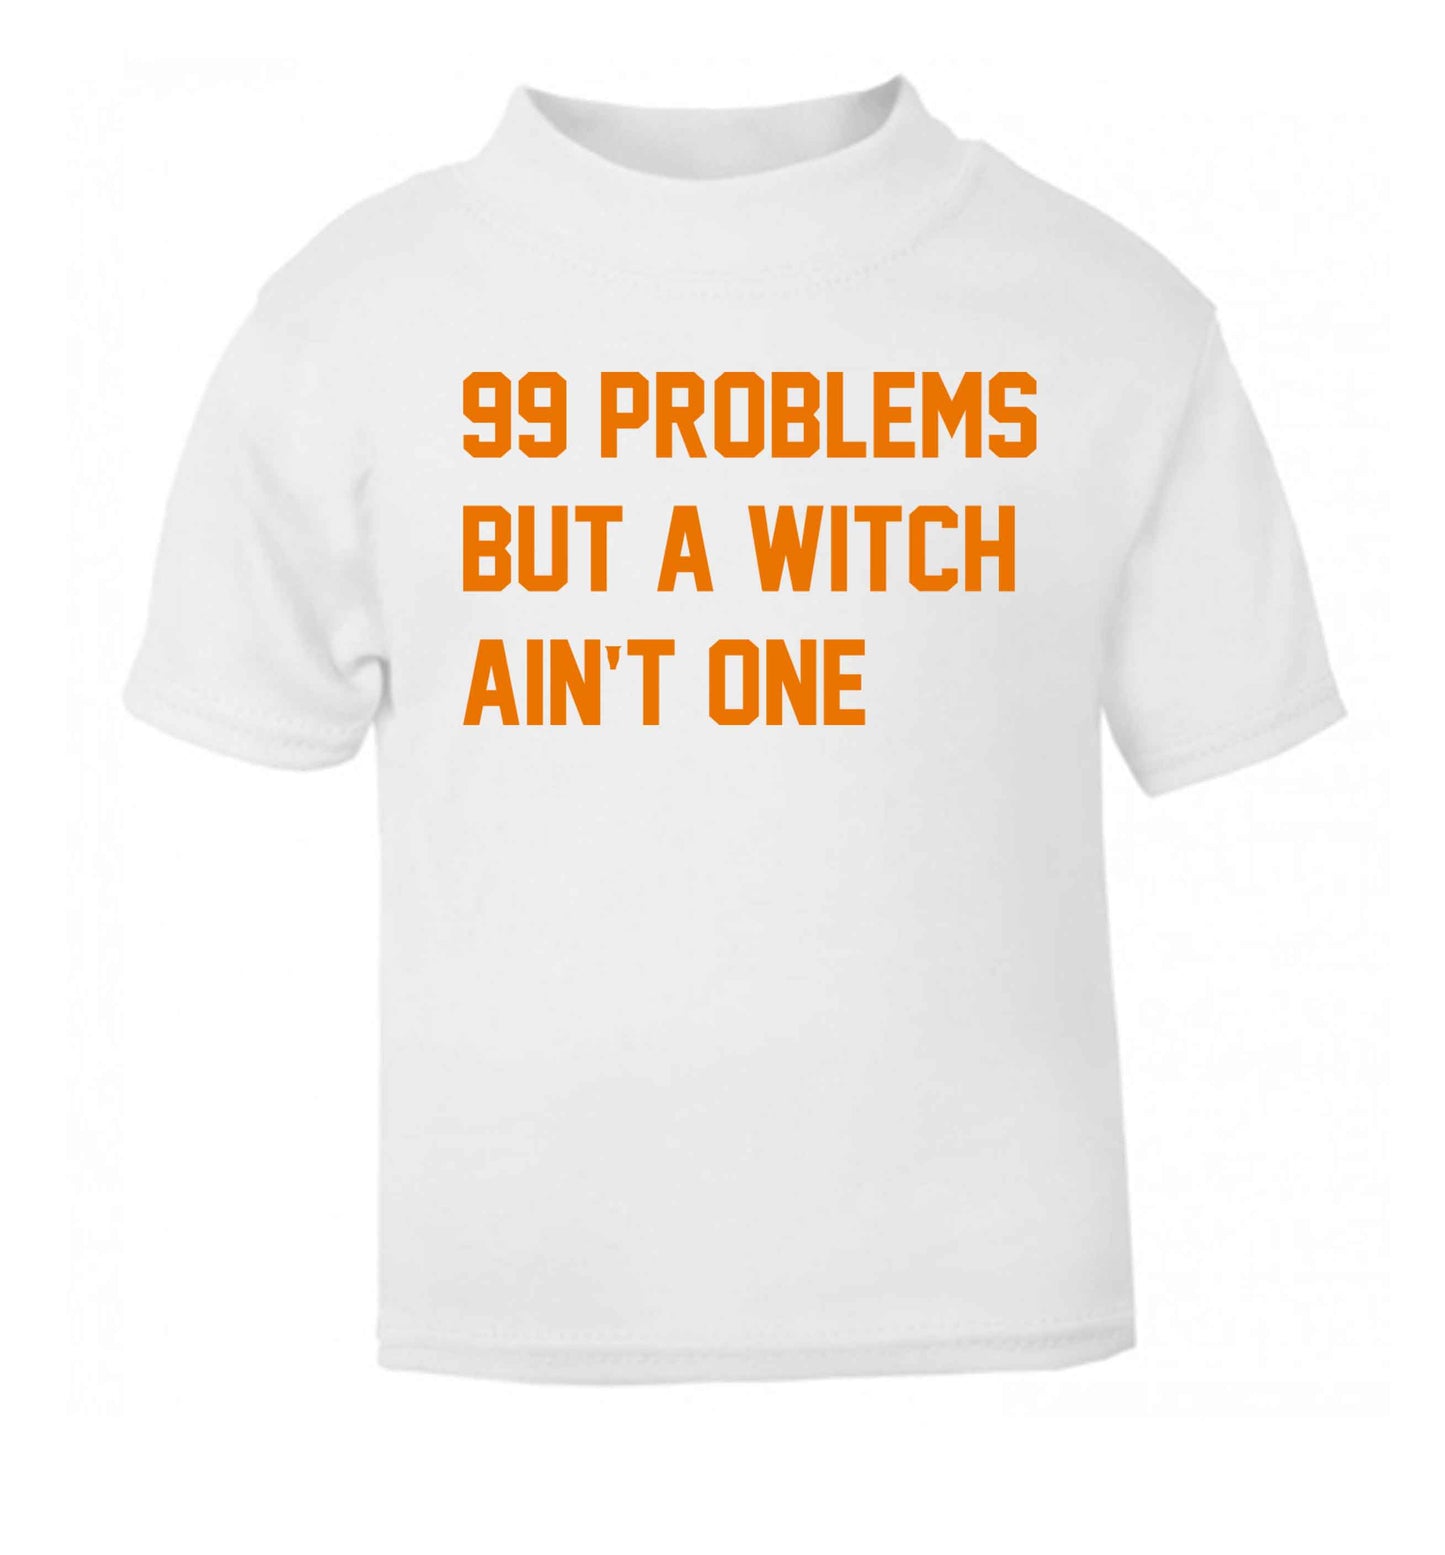 99 Problems but a witch aint one white baby toddler Tshirt 2 Years